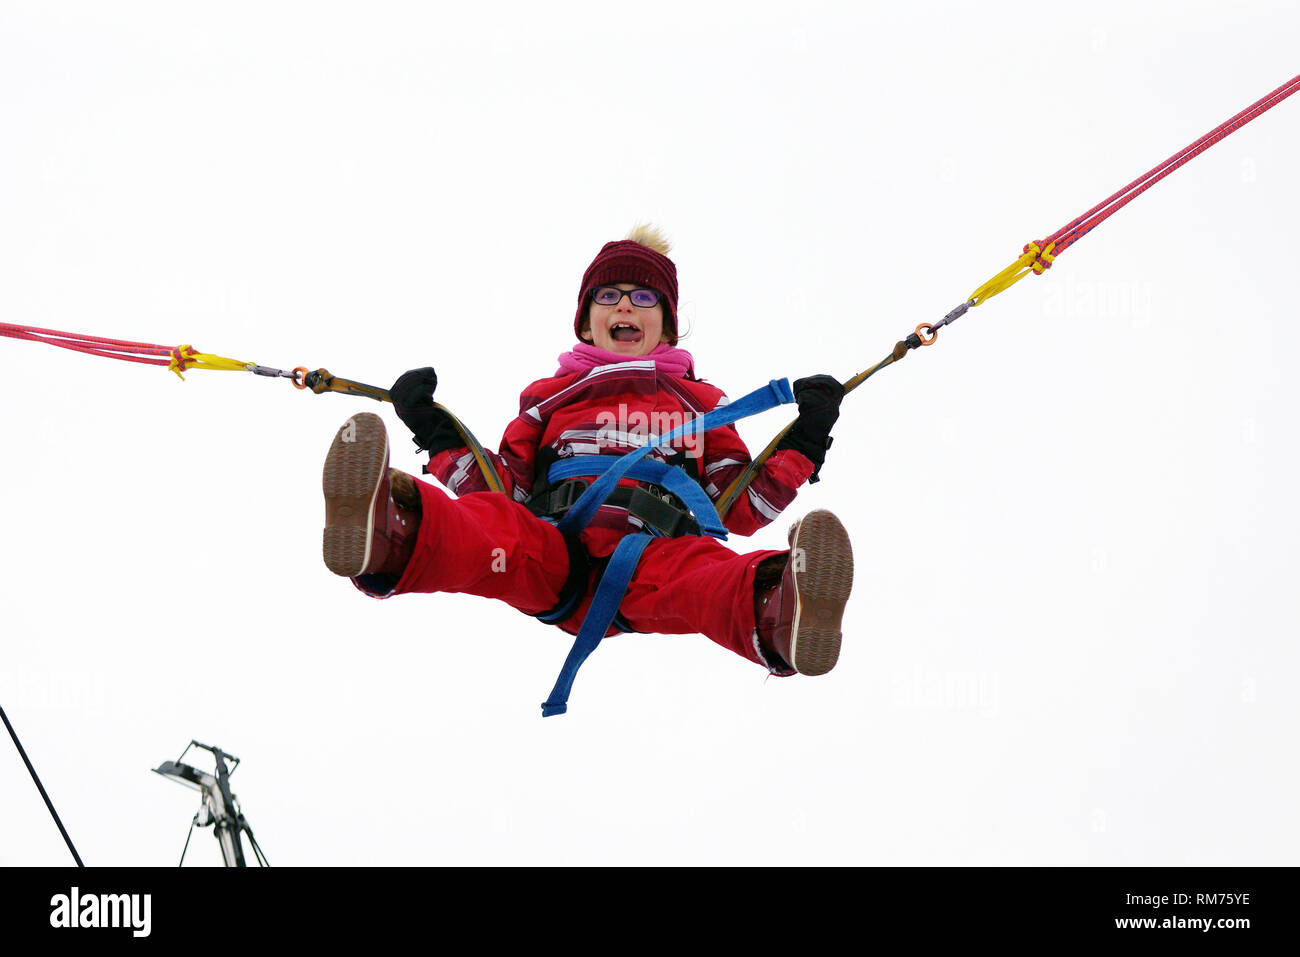 Little girl bungee jumping on trampoline during winter festival Stock Photo